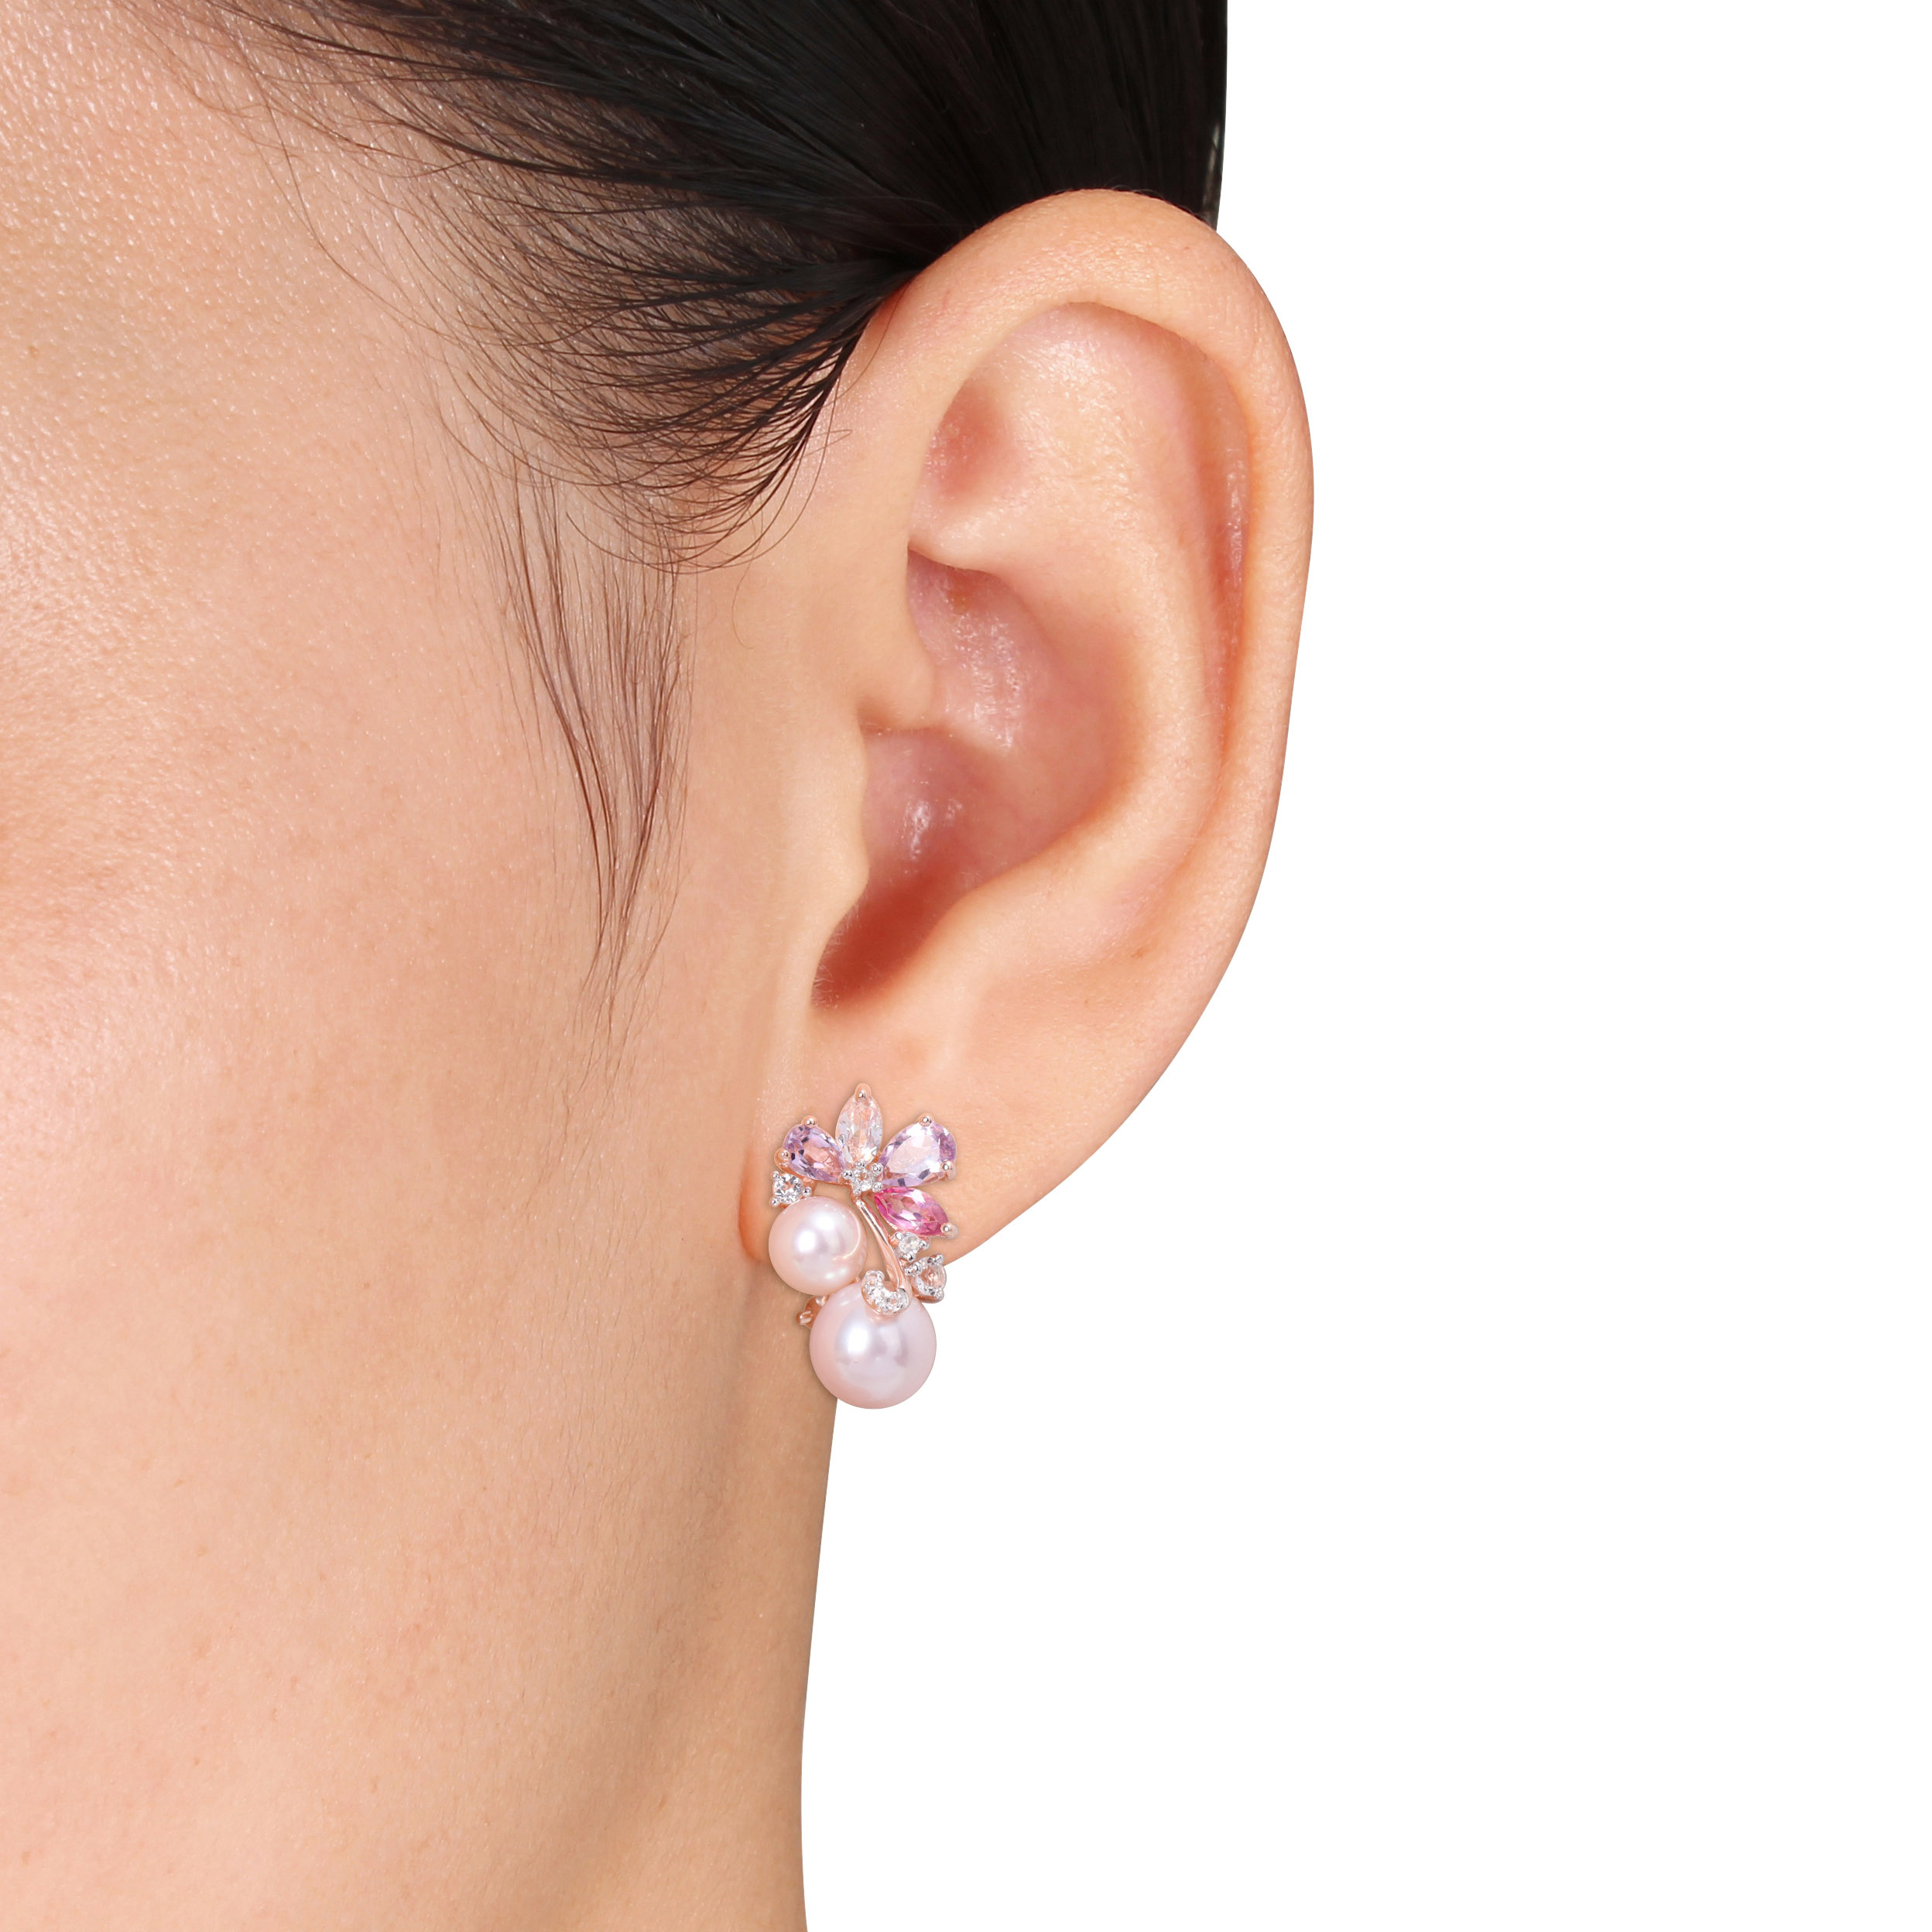 6 - 8.5 MM Pink Cultured Freshwater Pearl & 2 1/2 CT TGW Rose de France and Topaz Earrings in18k Rose Plated Sterling Silver